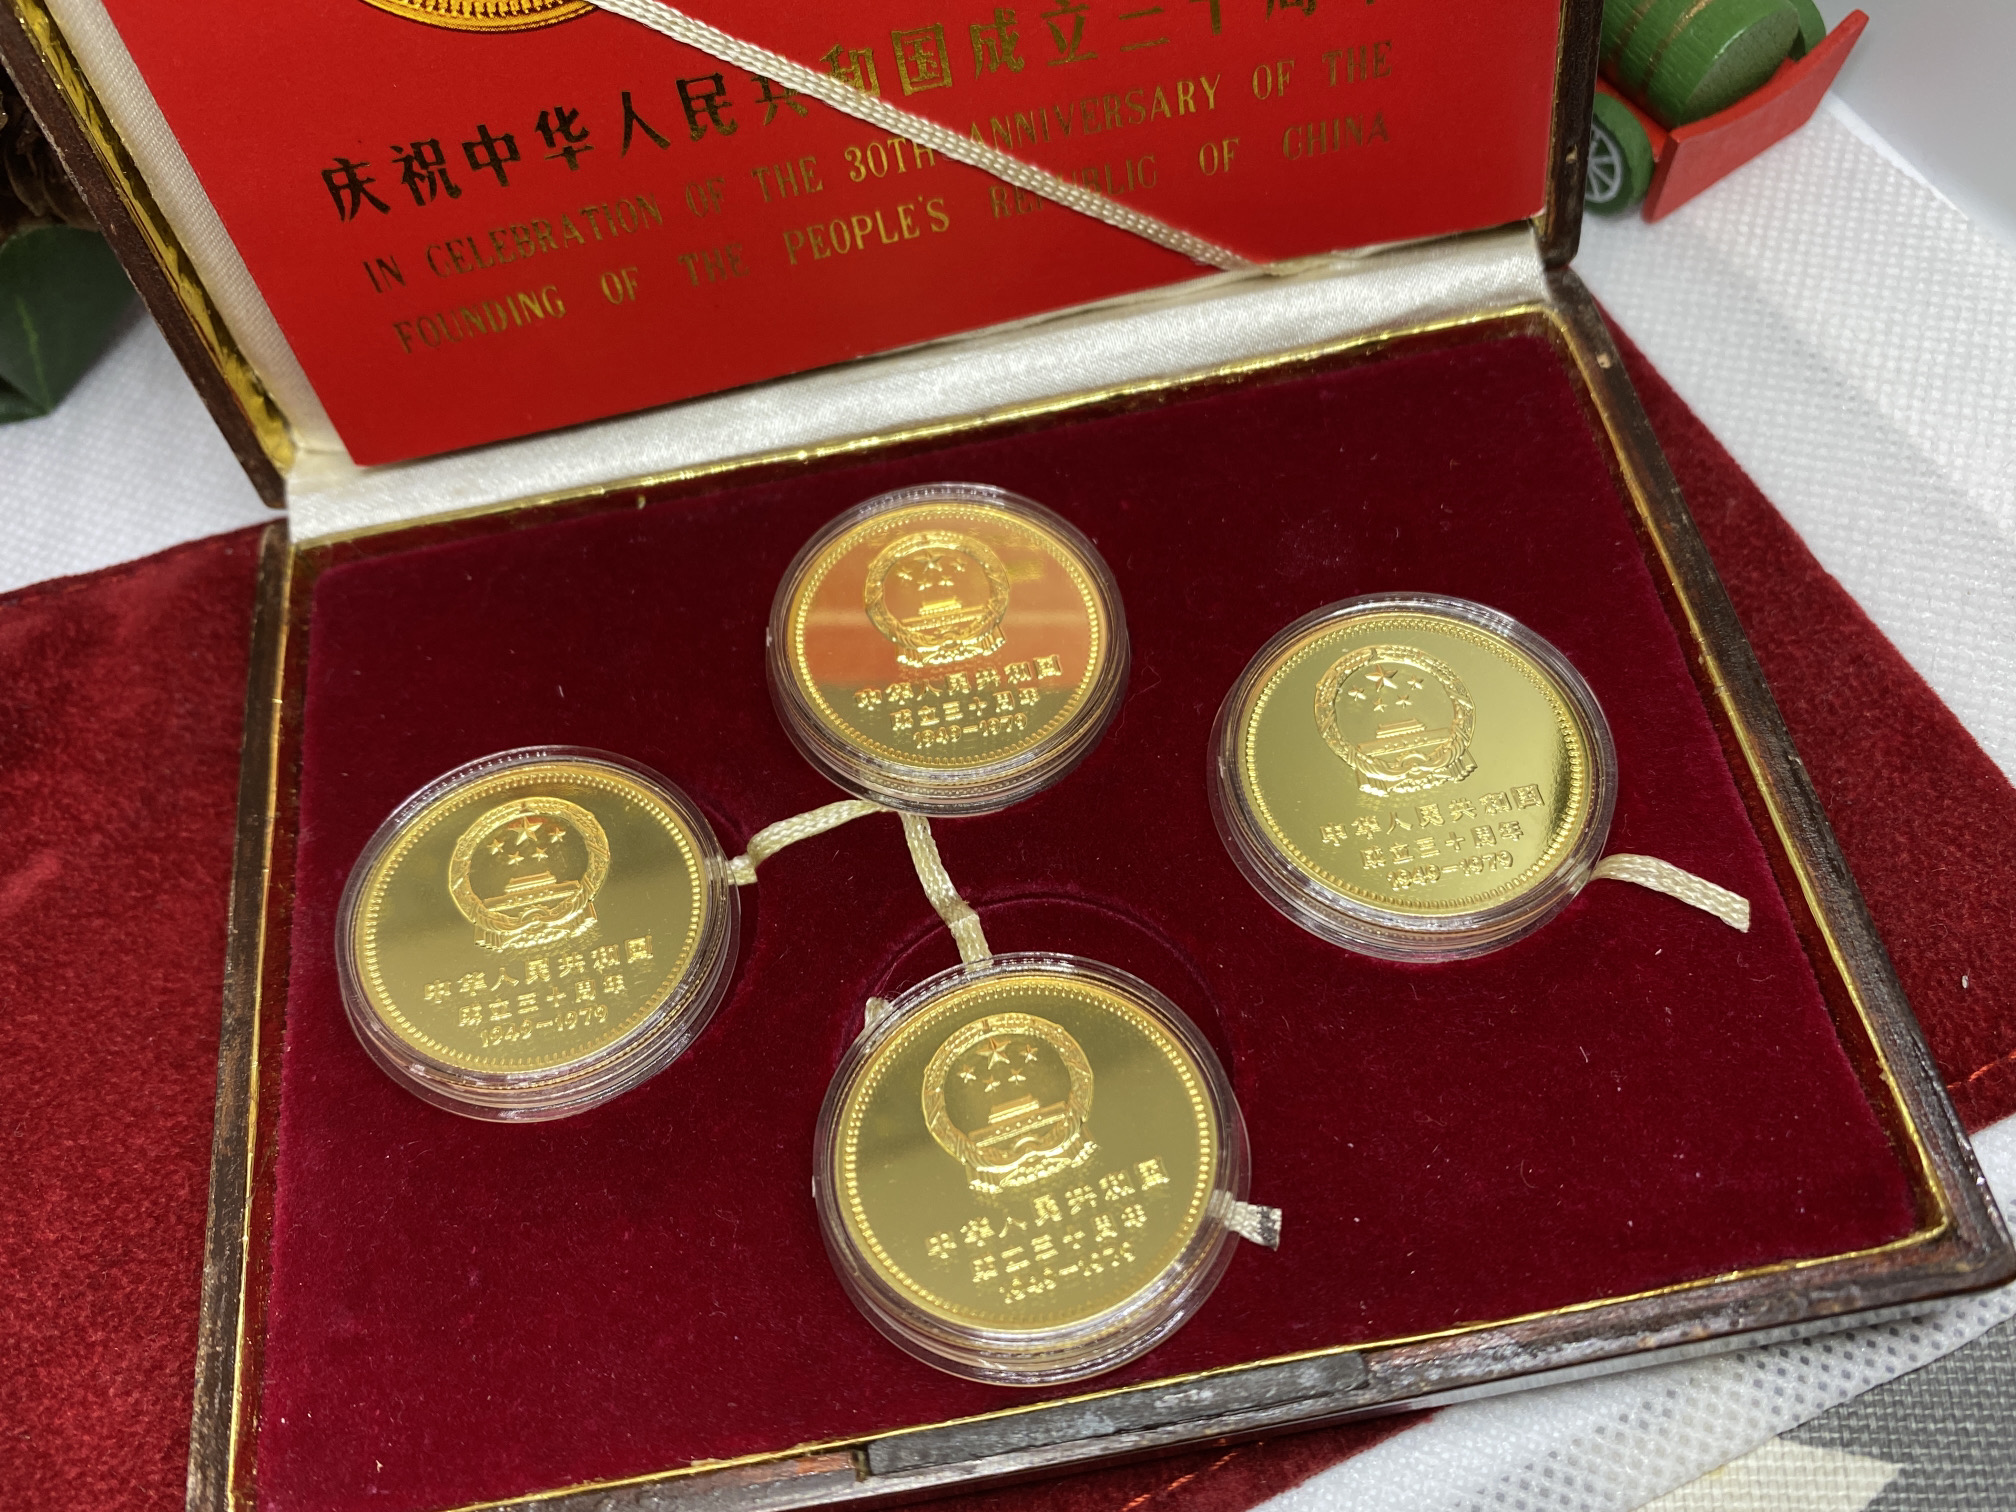 CHINA 4 COIN 2 OZ "30th Anniversary of the People's Republic" 400 Yuan Proof Set - Image 6 of 14